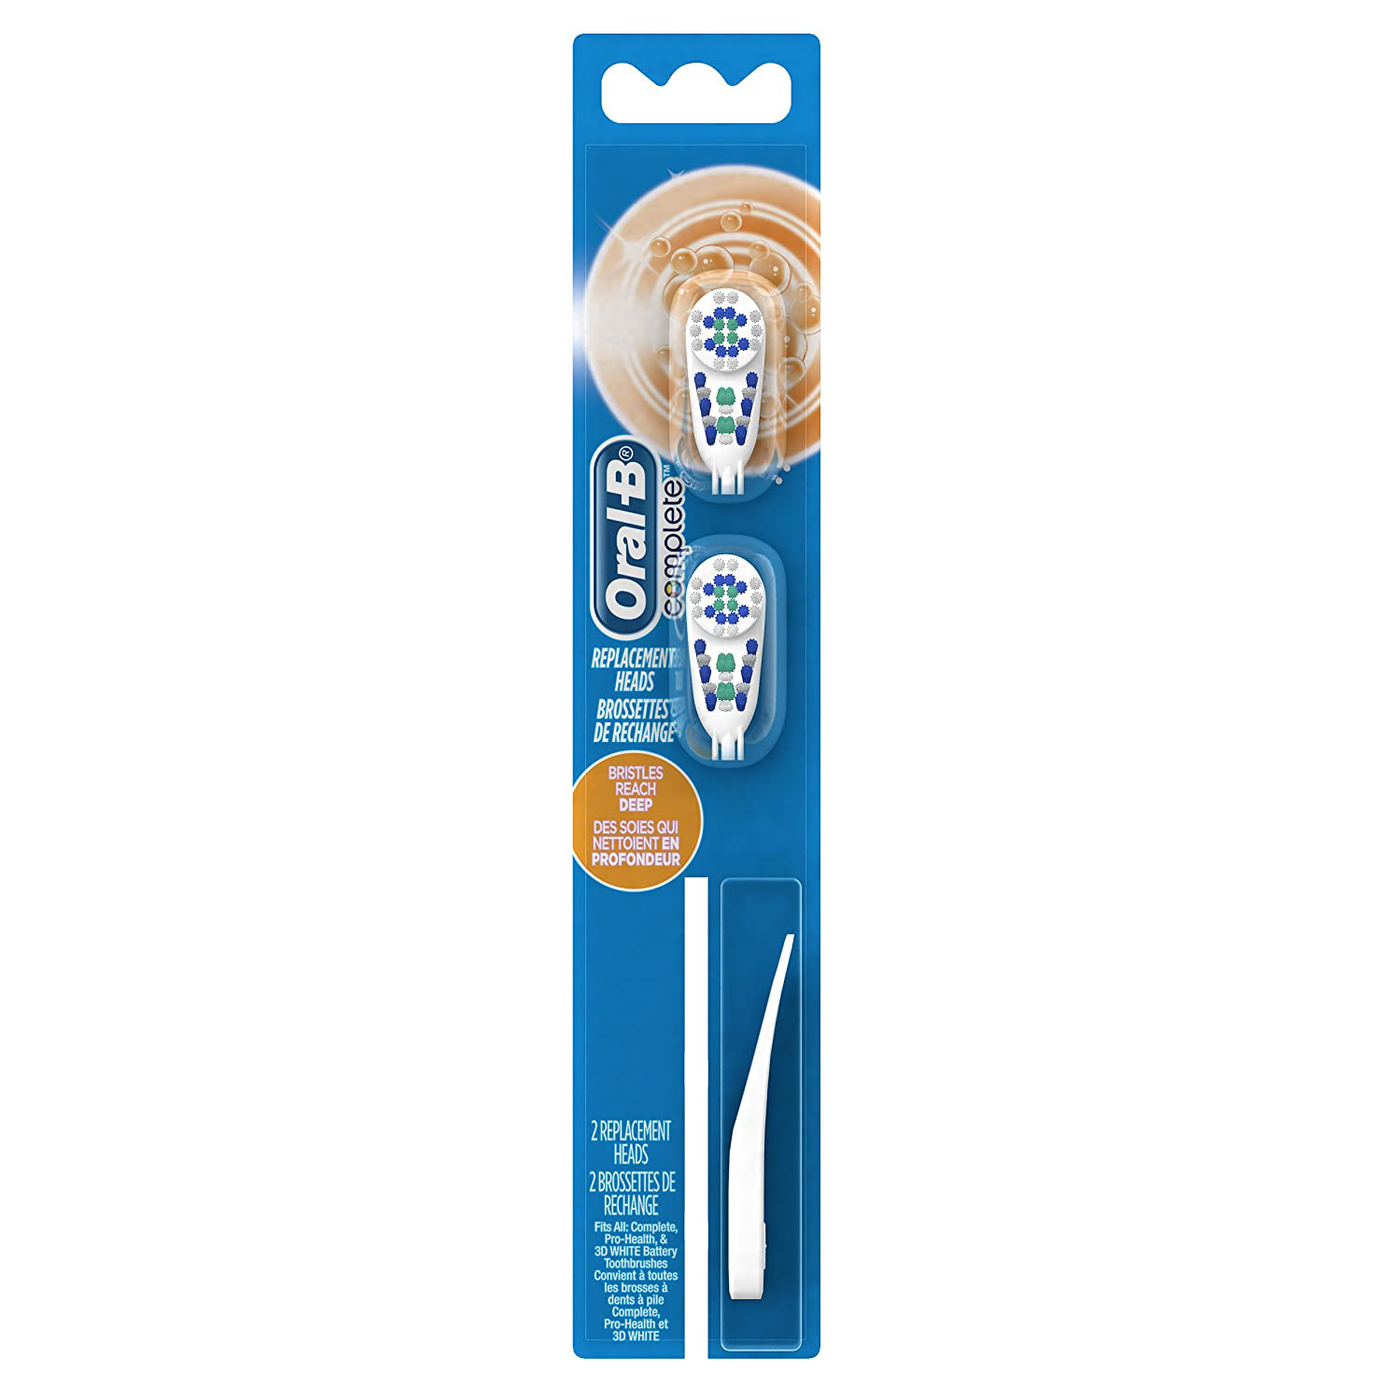 Multi Pack Oral-B Complete Electric Toothbrush Replacement Brush Heads Refill Soft Bristles